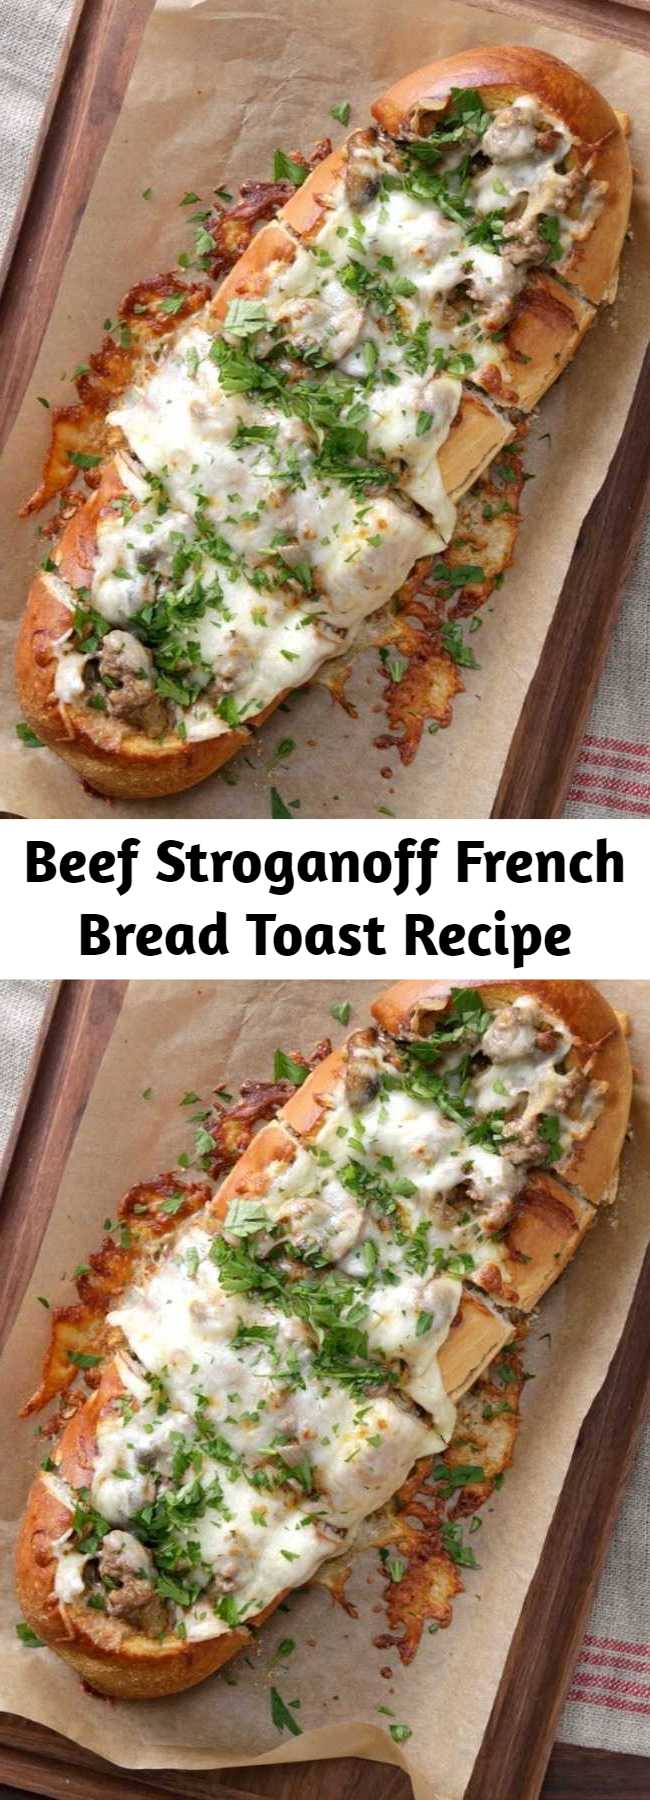 Beef Stroganoff French Bread Toast Recipe - Why serve beef stroganoff with a side of French bread when it's so much tastier served inside the French bread?